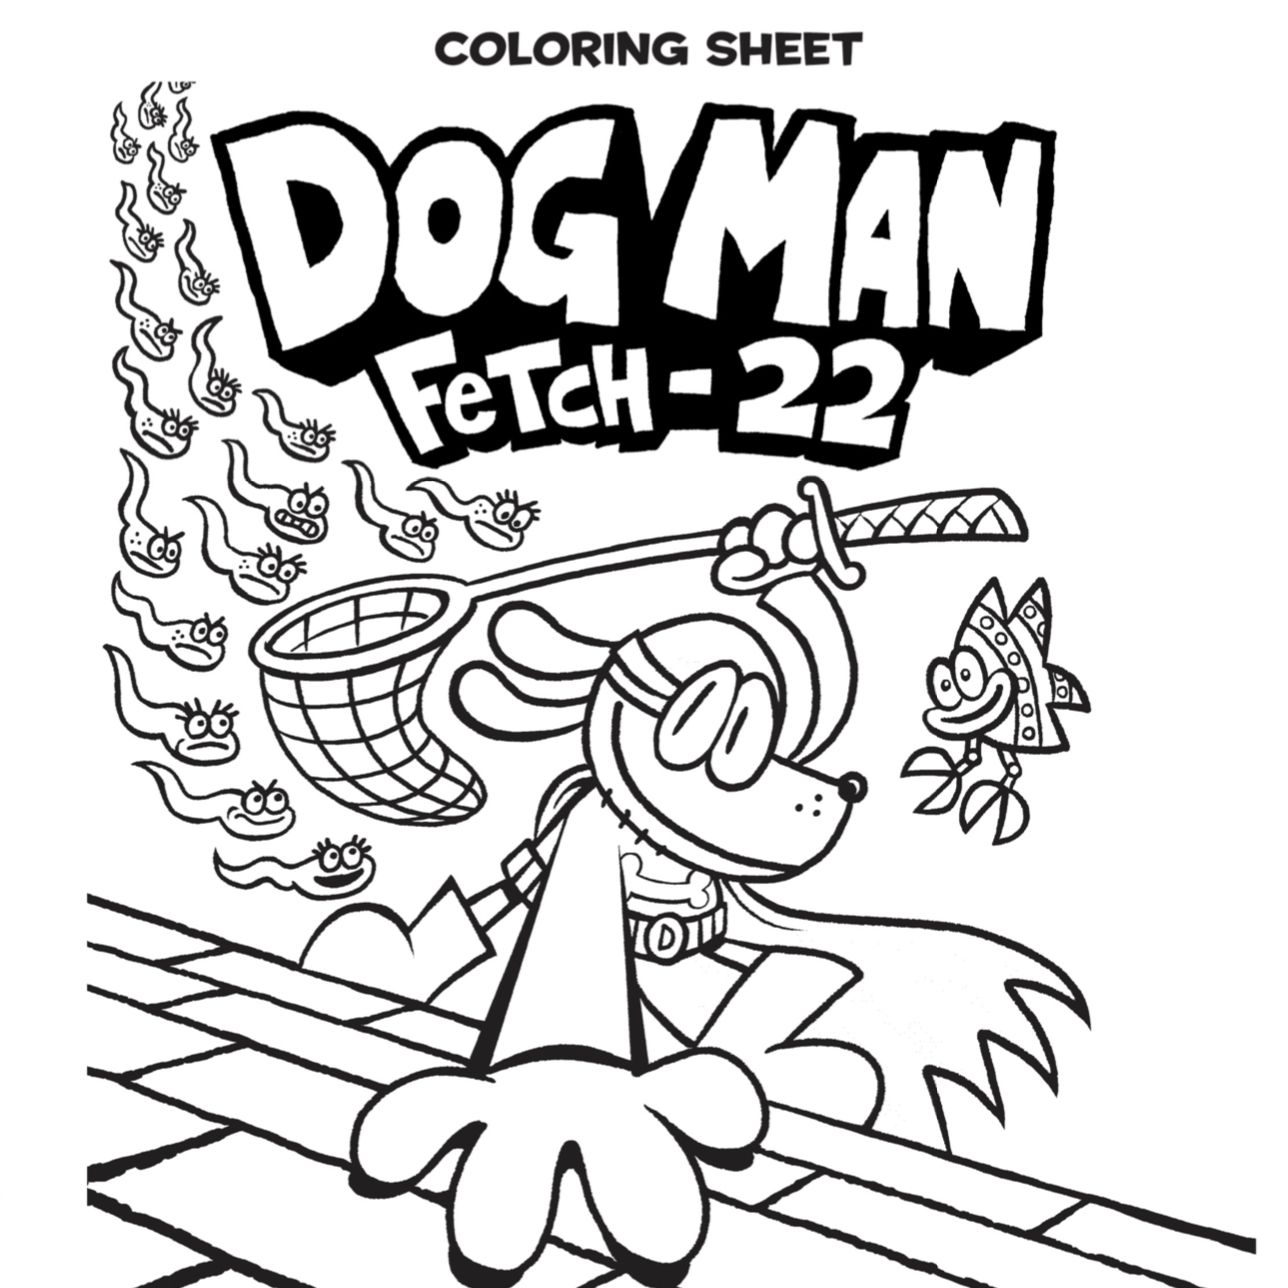 Dogman coloring pages for kids coloring pages free coloring pages colouring pages